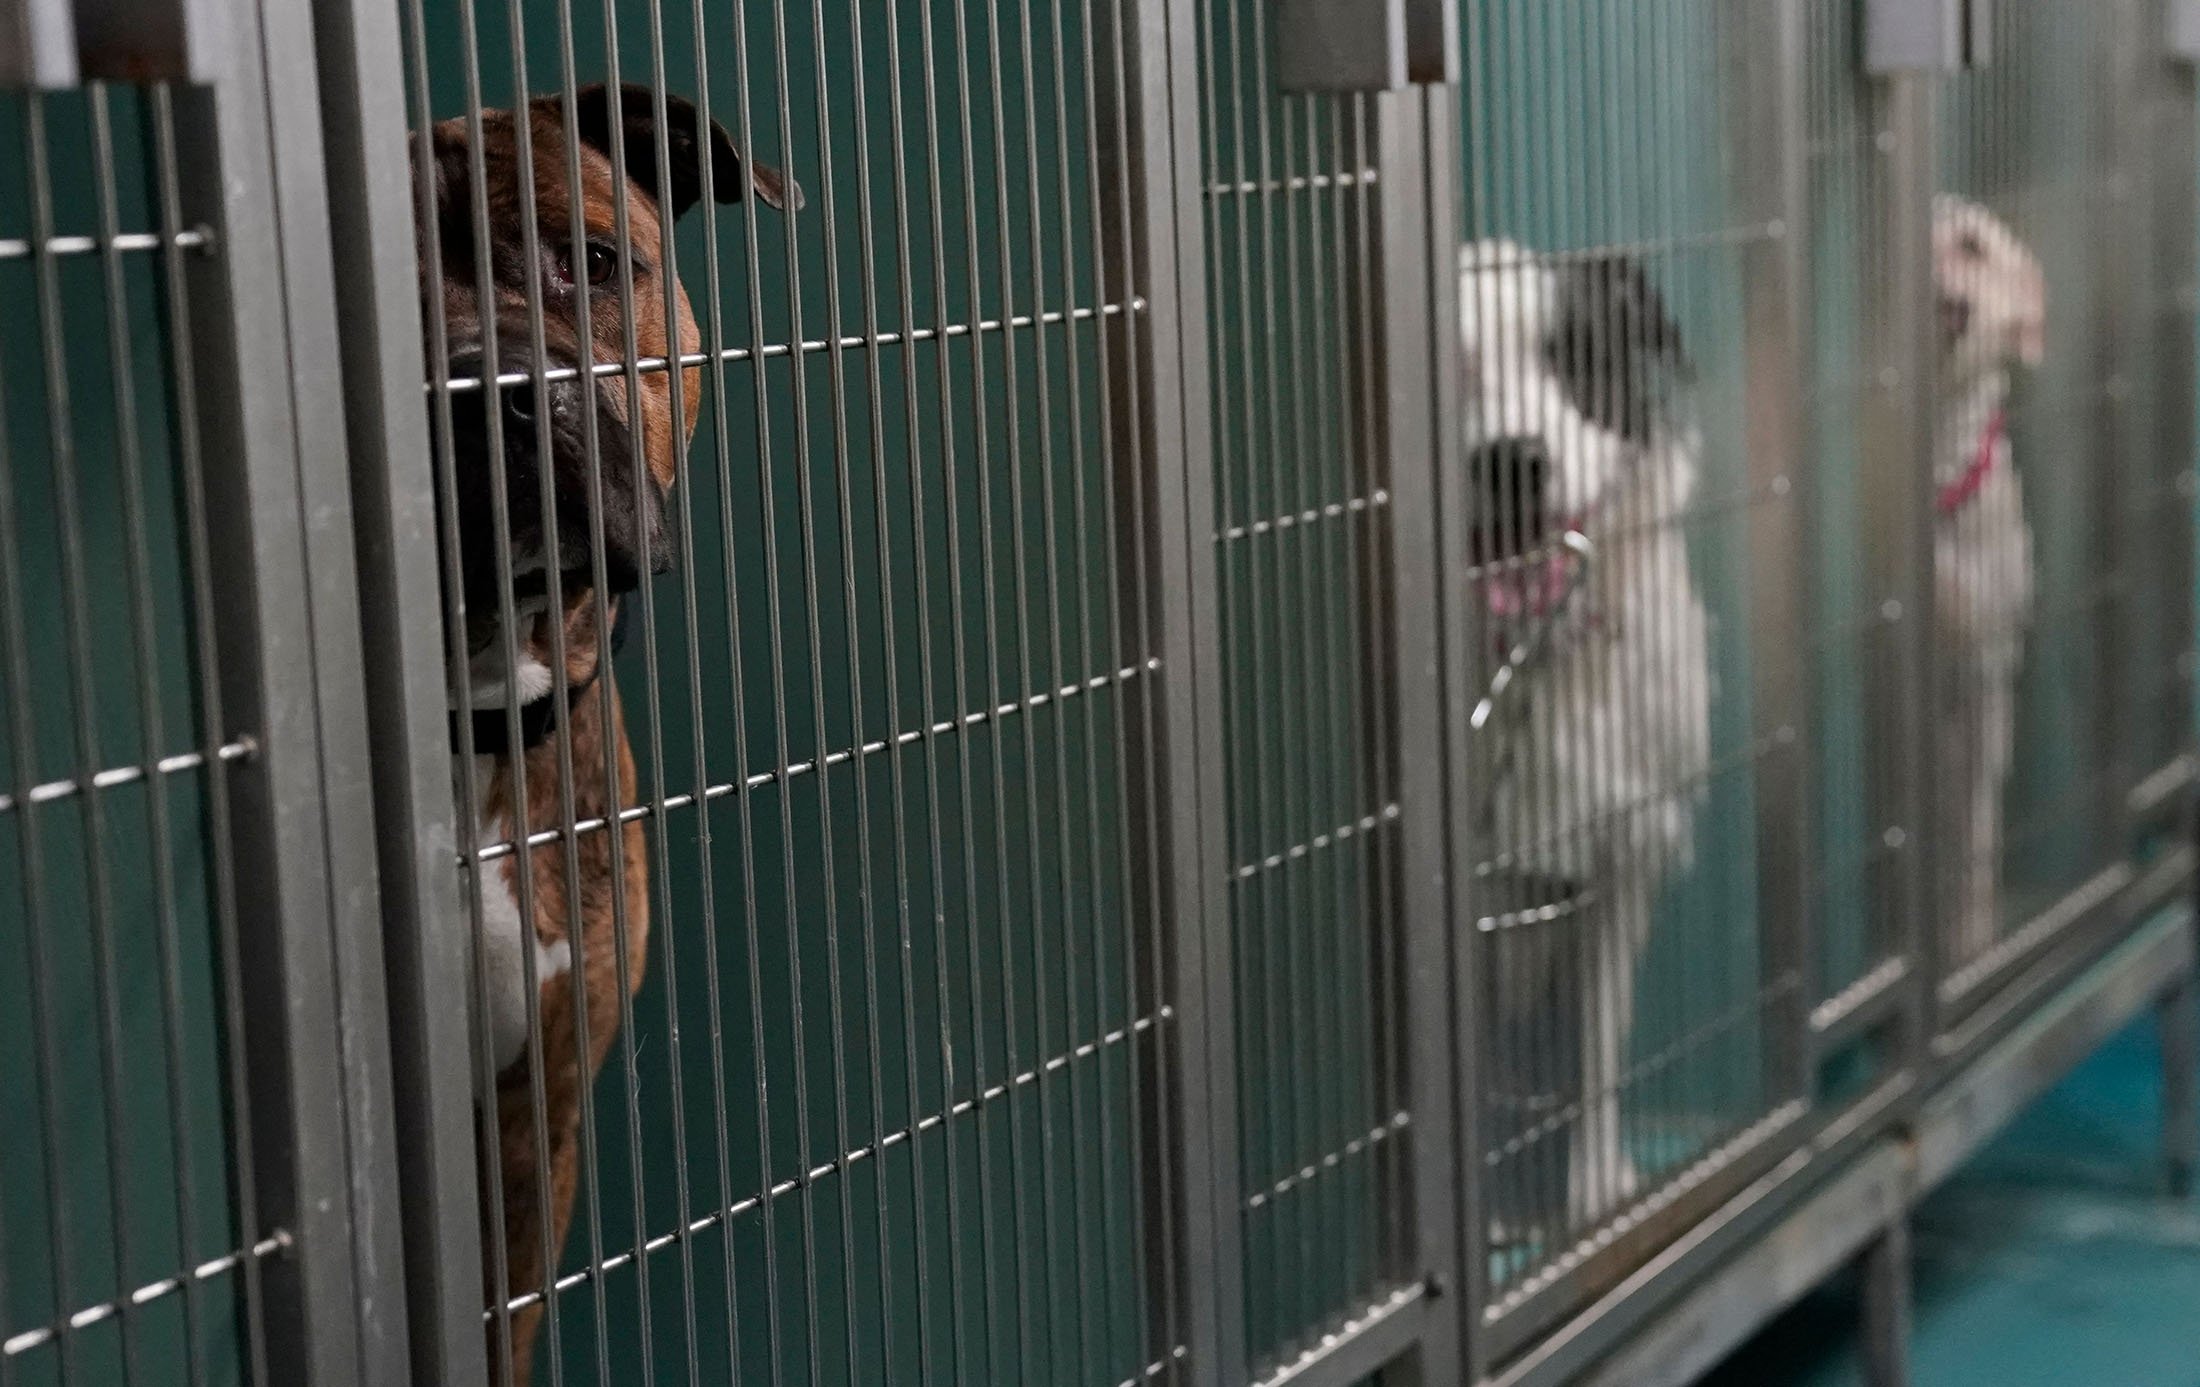 Dogs are kenneled at the Animal Care Center of New York, U.S., June 25, 2021. (AFP Photo)